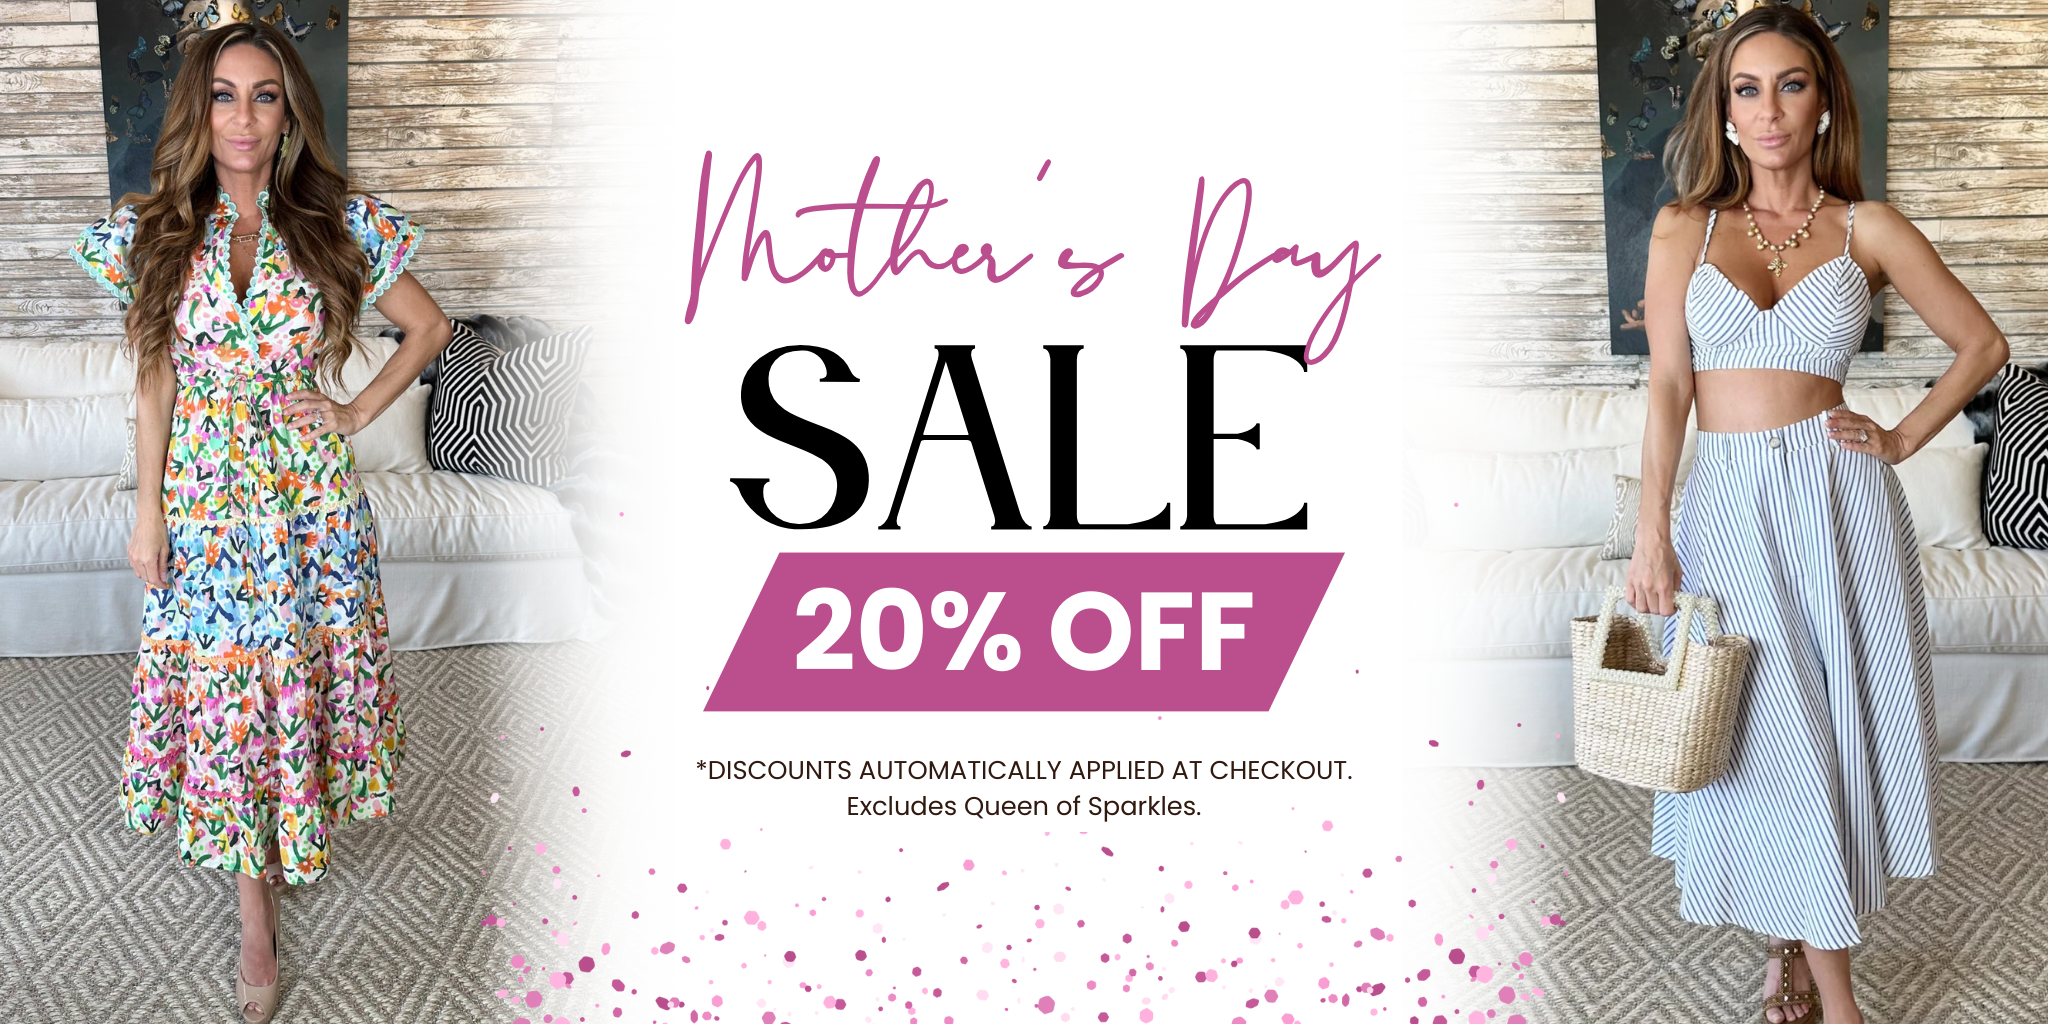 20% OFF MOTHER'S DAY SALE at Bloom West Boutique. Discount applied at checkout. Excludes queen of sparkles items.   | Women's Fashion Boutique in Houma, LA